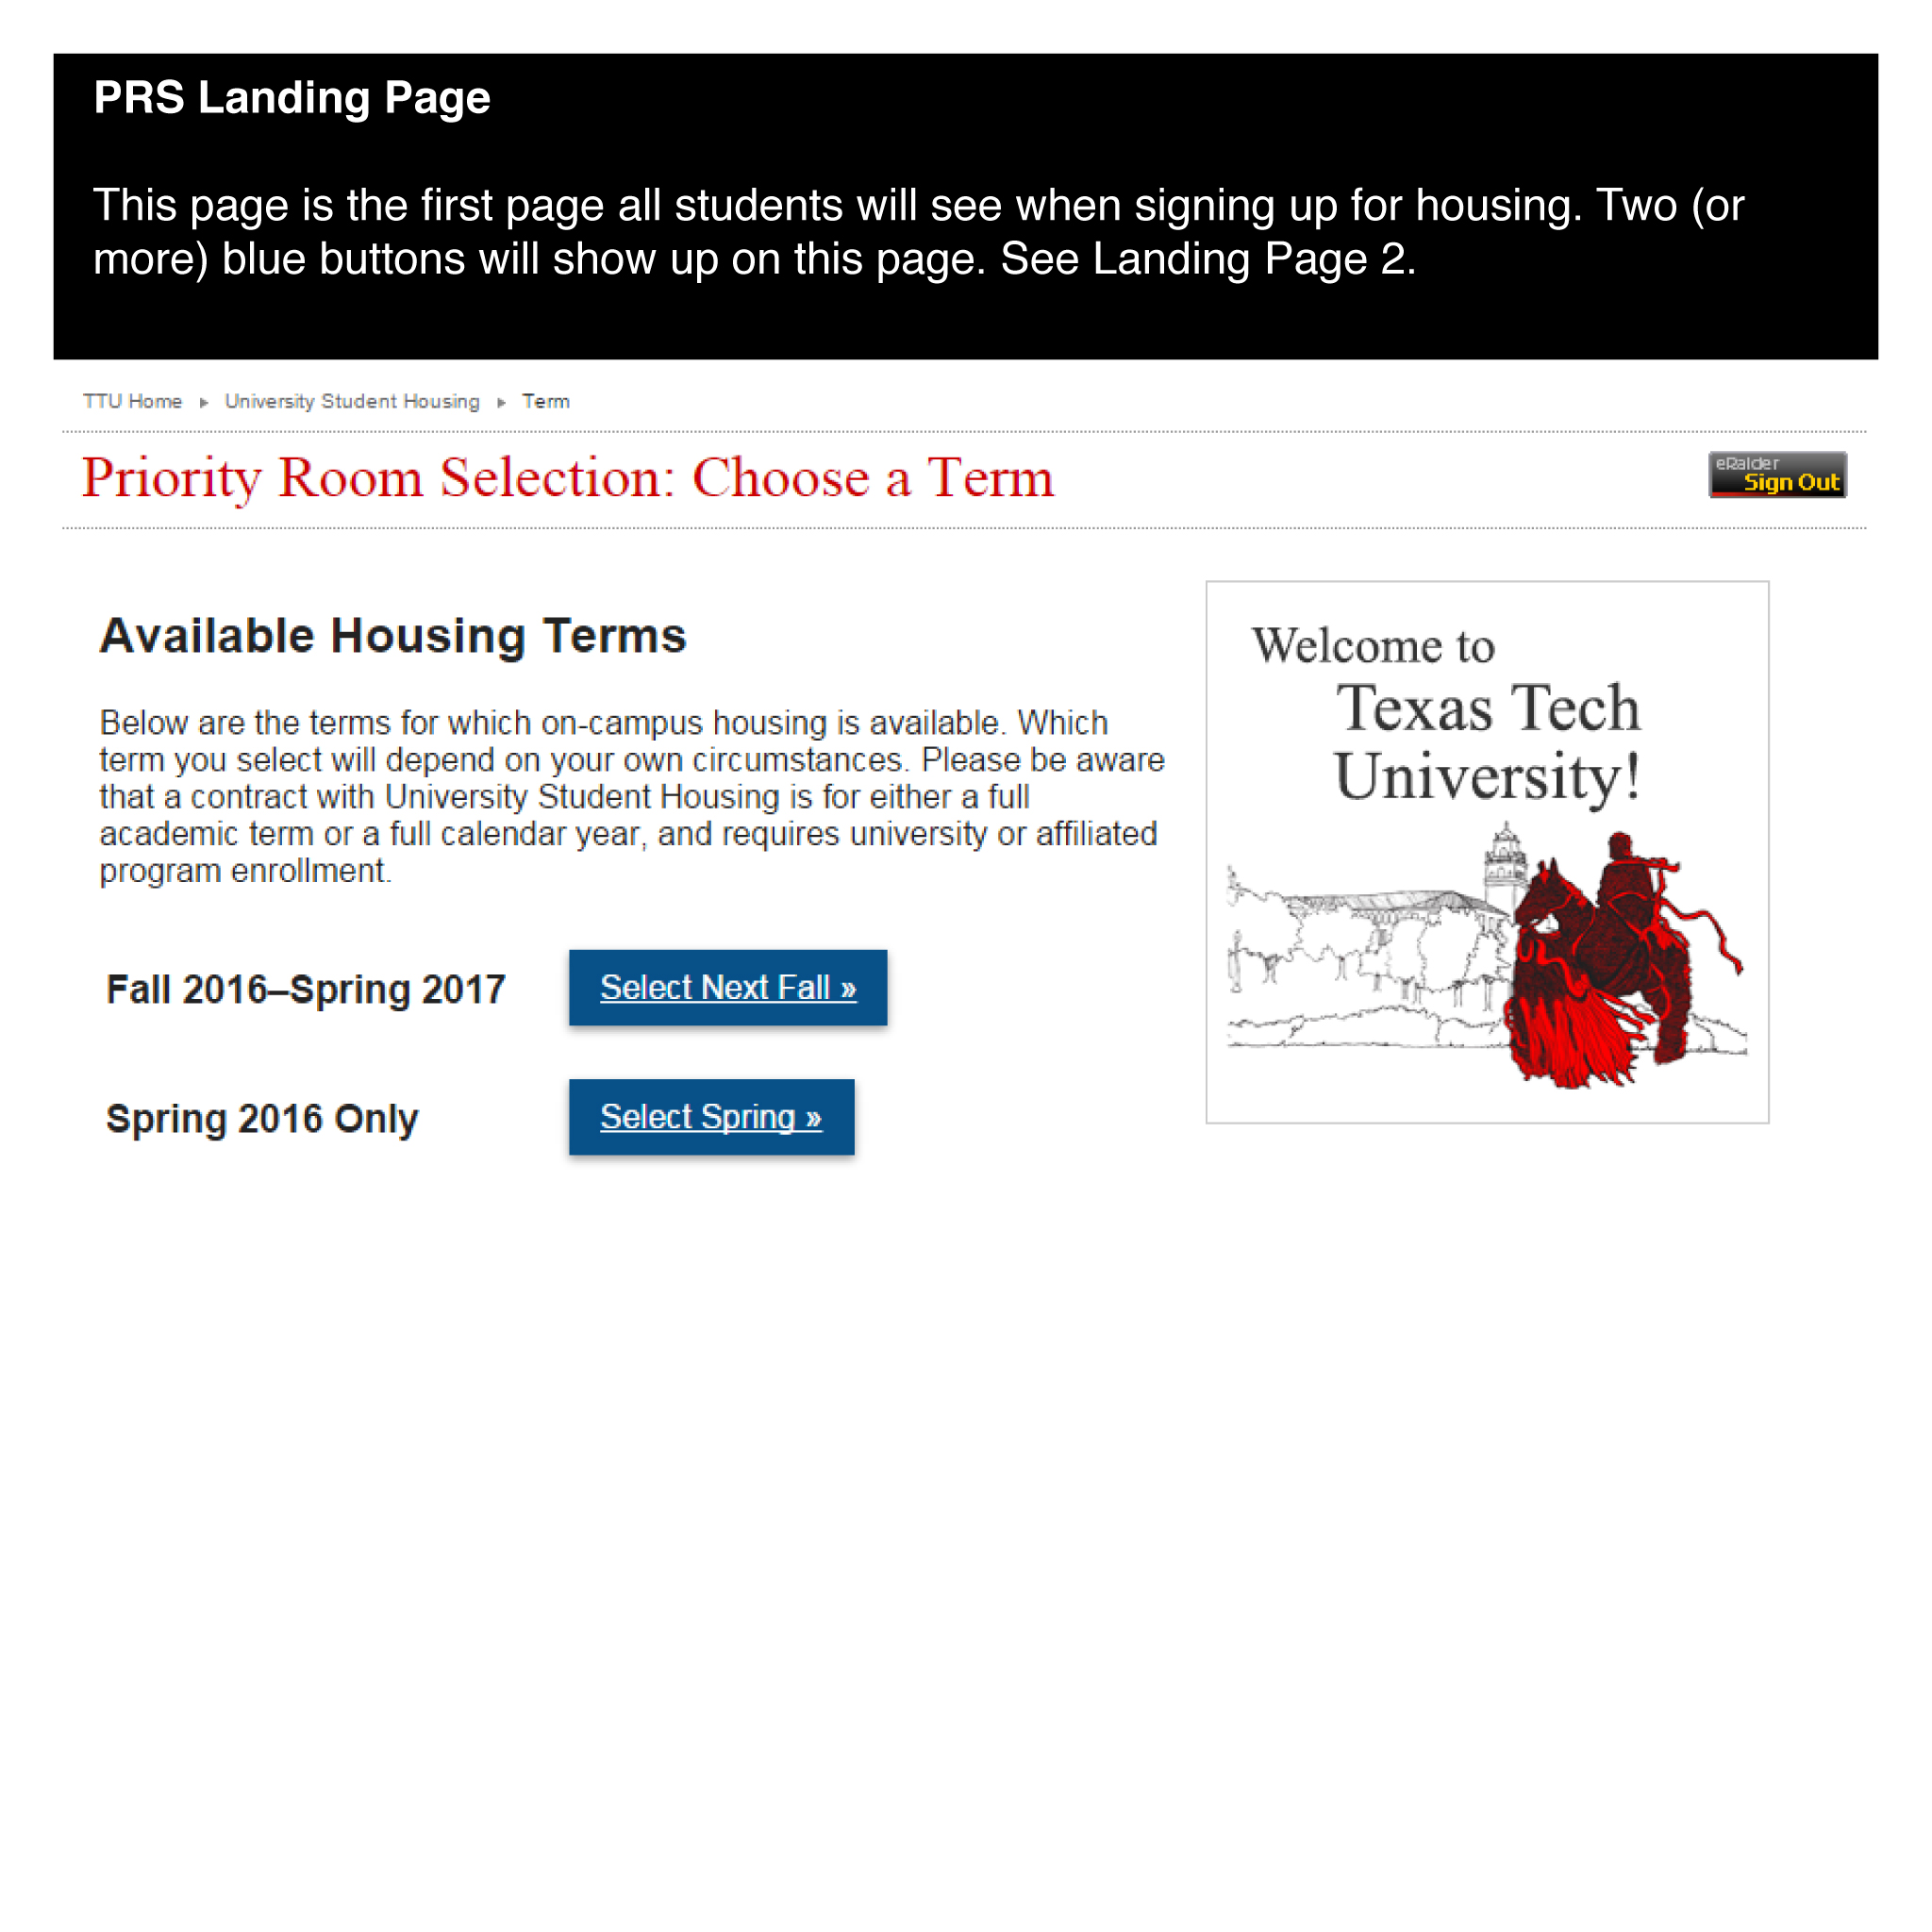 PRS Landing Page This page is the first page all students will see when signing up for housing. Two (or more) blue buttons will show up on this page. See Landing Page 2.